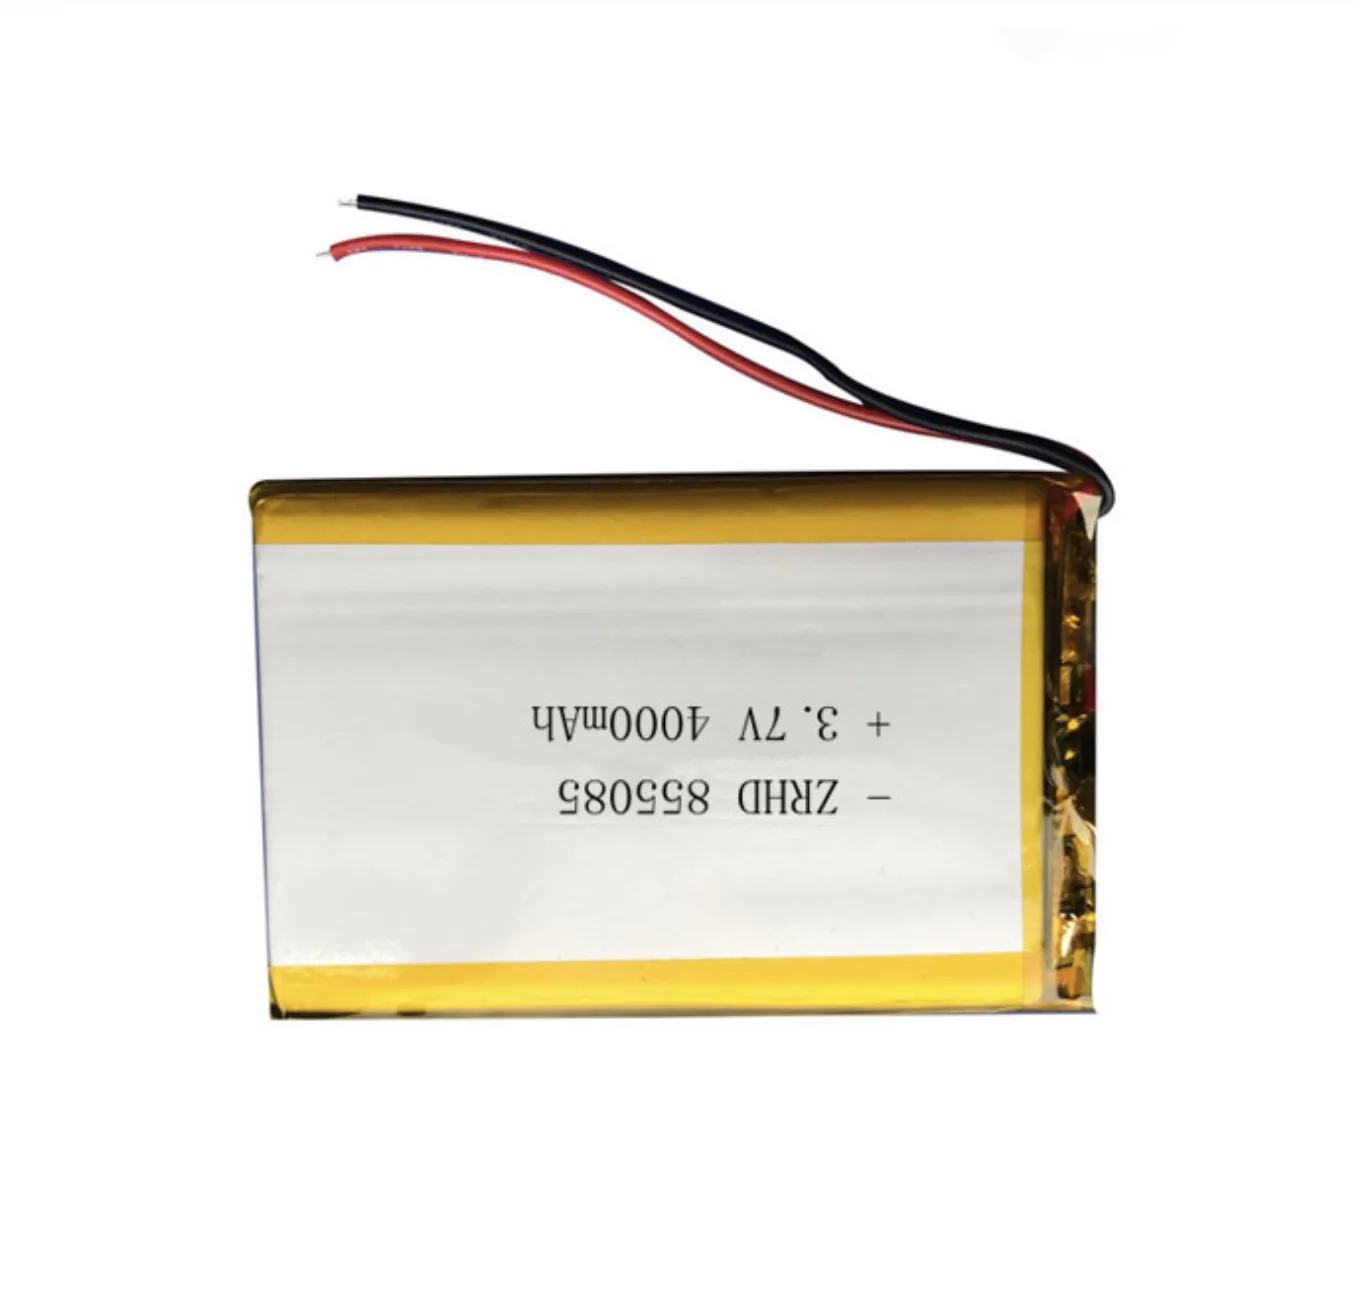 https://ae01.alicdn.com/kf/S5cd4bde191d540329d767f521cbde372l/855085-polymer-lithium-battery-3-7V-4000mAh-is-suitable-for-mobile-power-lithium-battery-with-protection.jpg